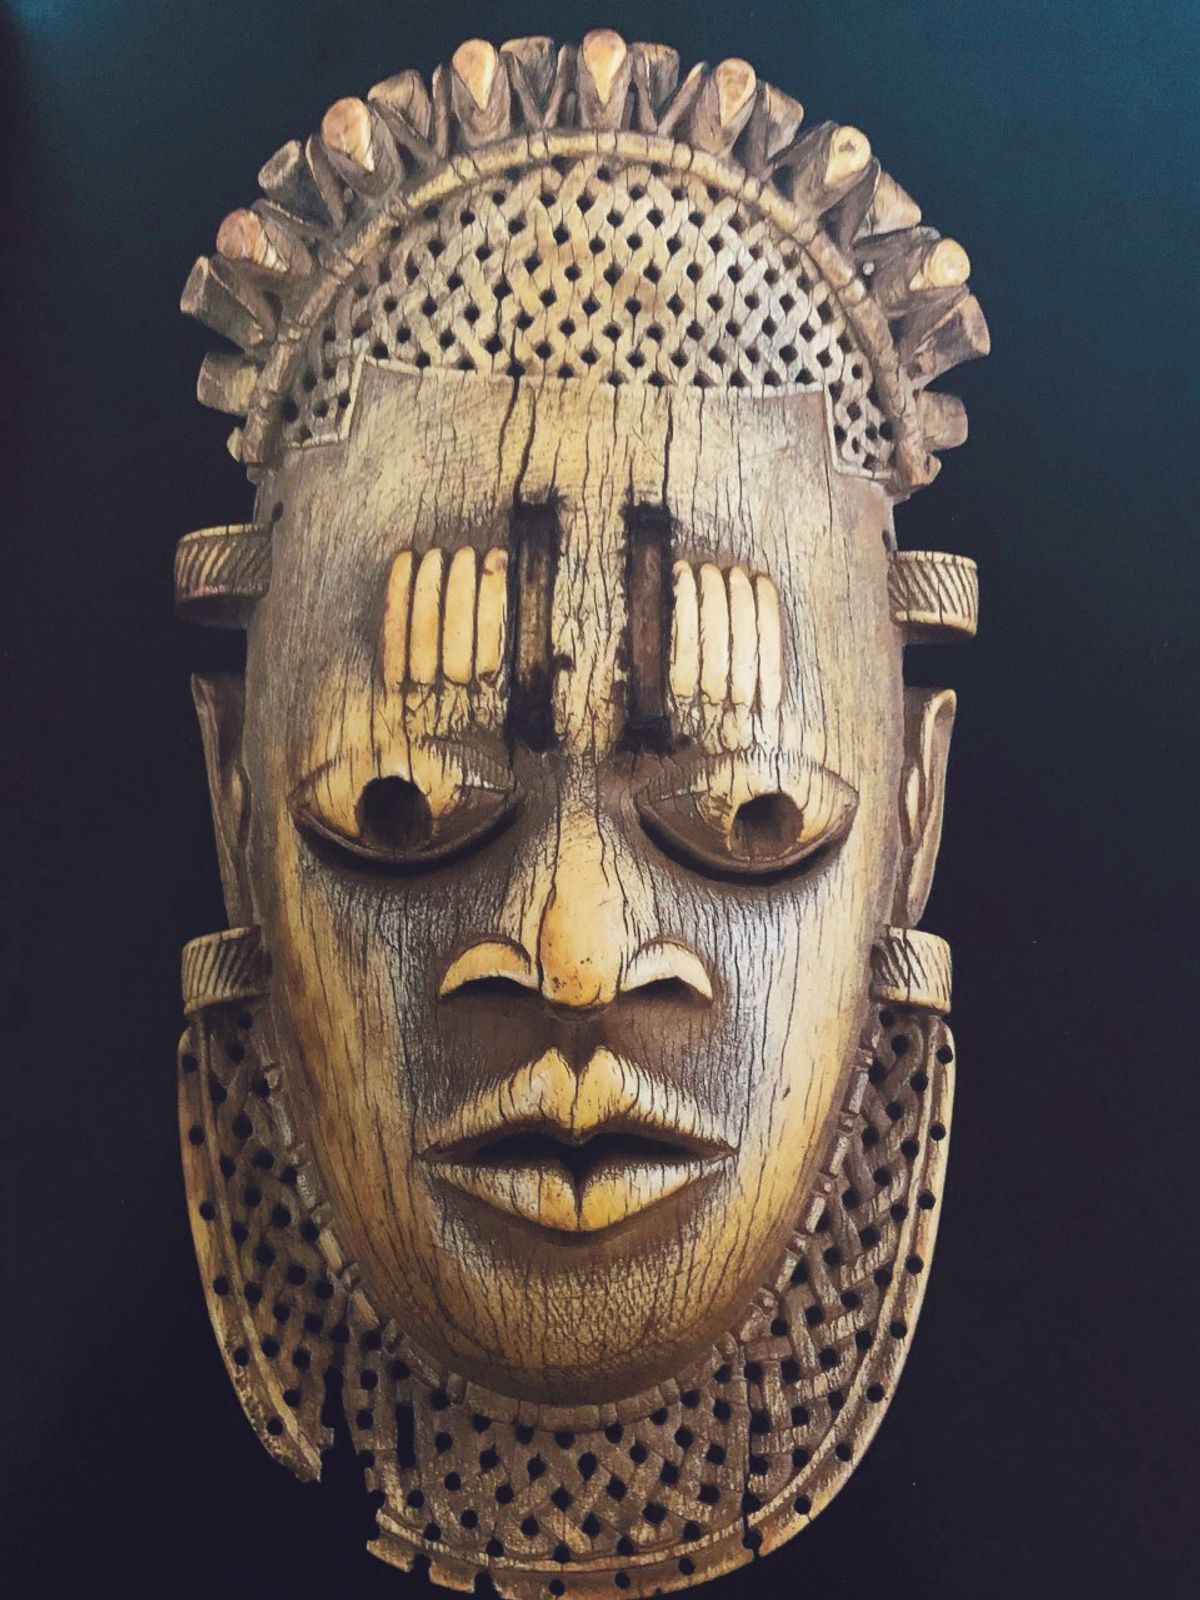 This rare ivory mask, now in the Al-Thani collection in Paris, is one of five similar ivory hip pendants produced for the ceremonial use of the Oba, the ruler of the Edo people. It is thought to represent Idia, mother of Oba Esigie, who ruled in the 16th century. All five known ivory masks were found together in the Oba’s bedchamber by the British when they sacked Benin City in 1897

Courtesy of Sotheby's